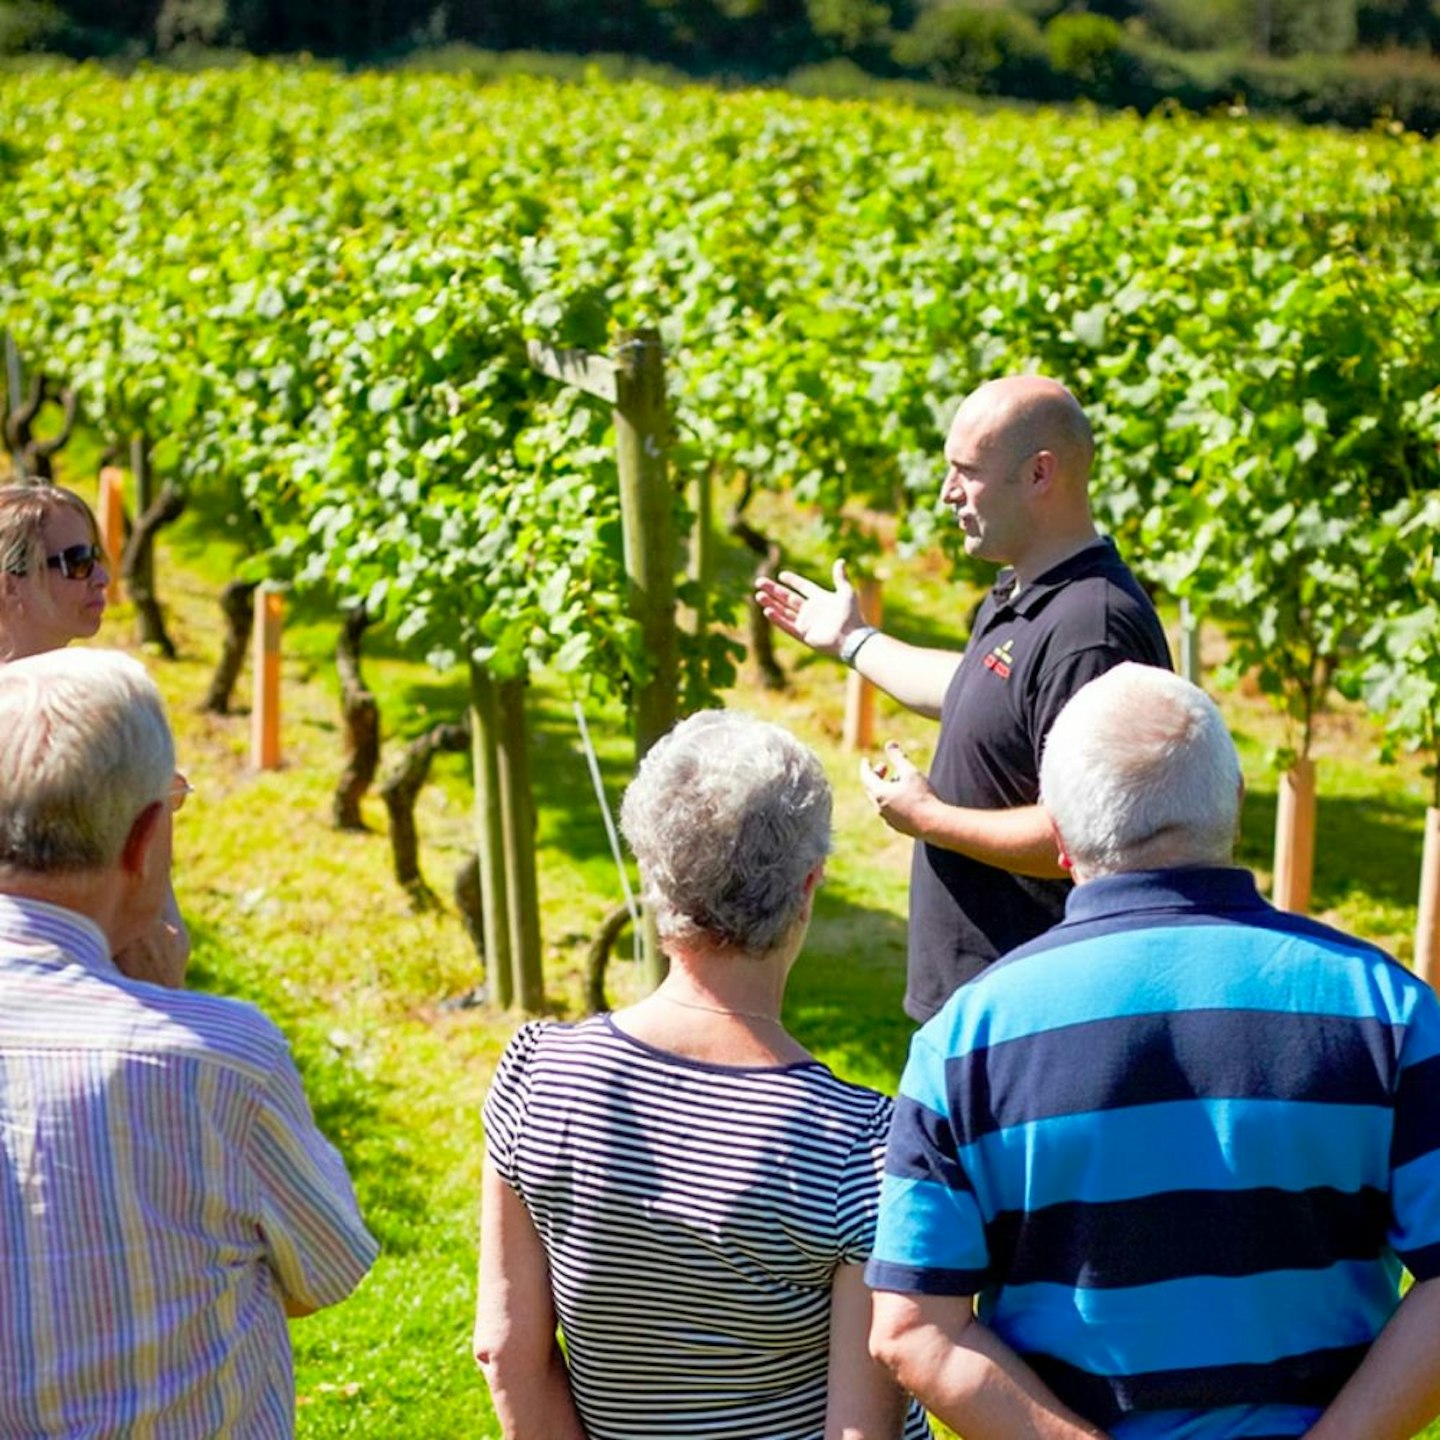 One Night Countryside Break with Vineyard Tour and Wine Tasting at Chapel Down Winery for Two